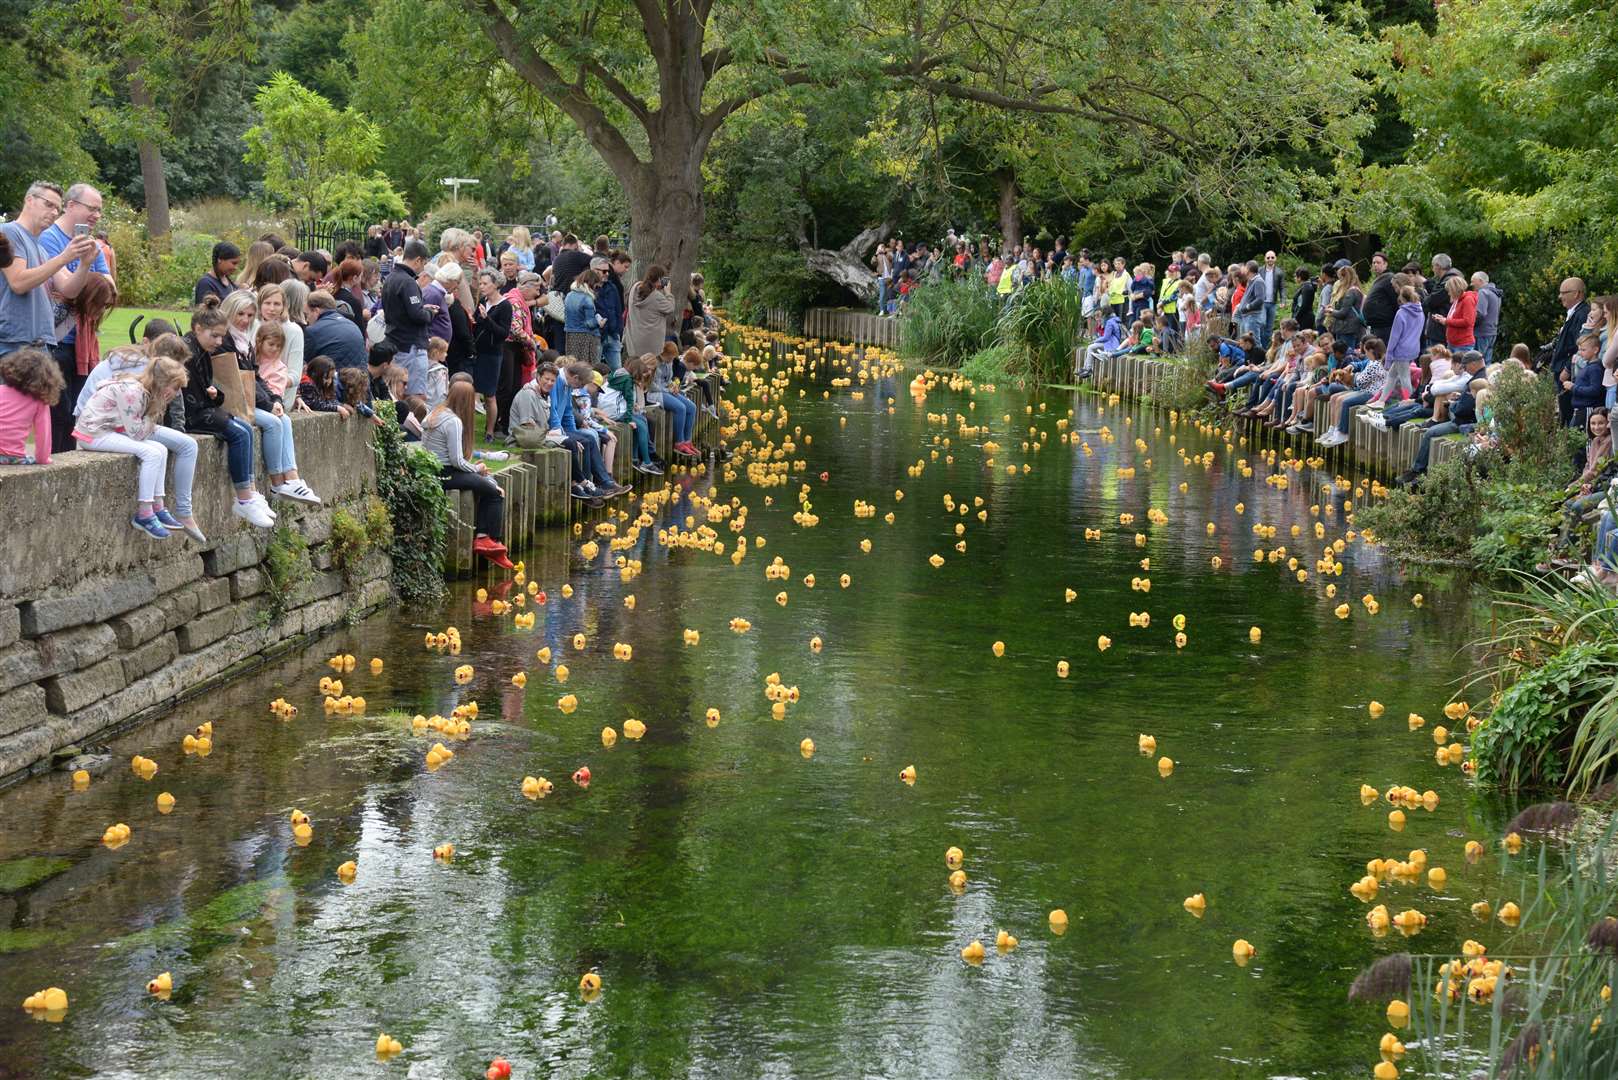 The duck race is popular with hundreds of families who line the river